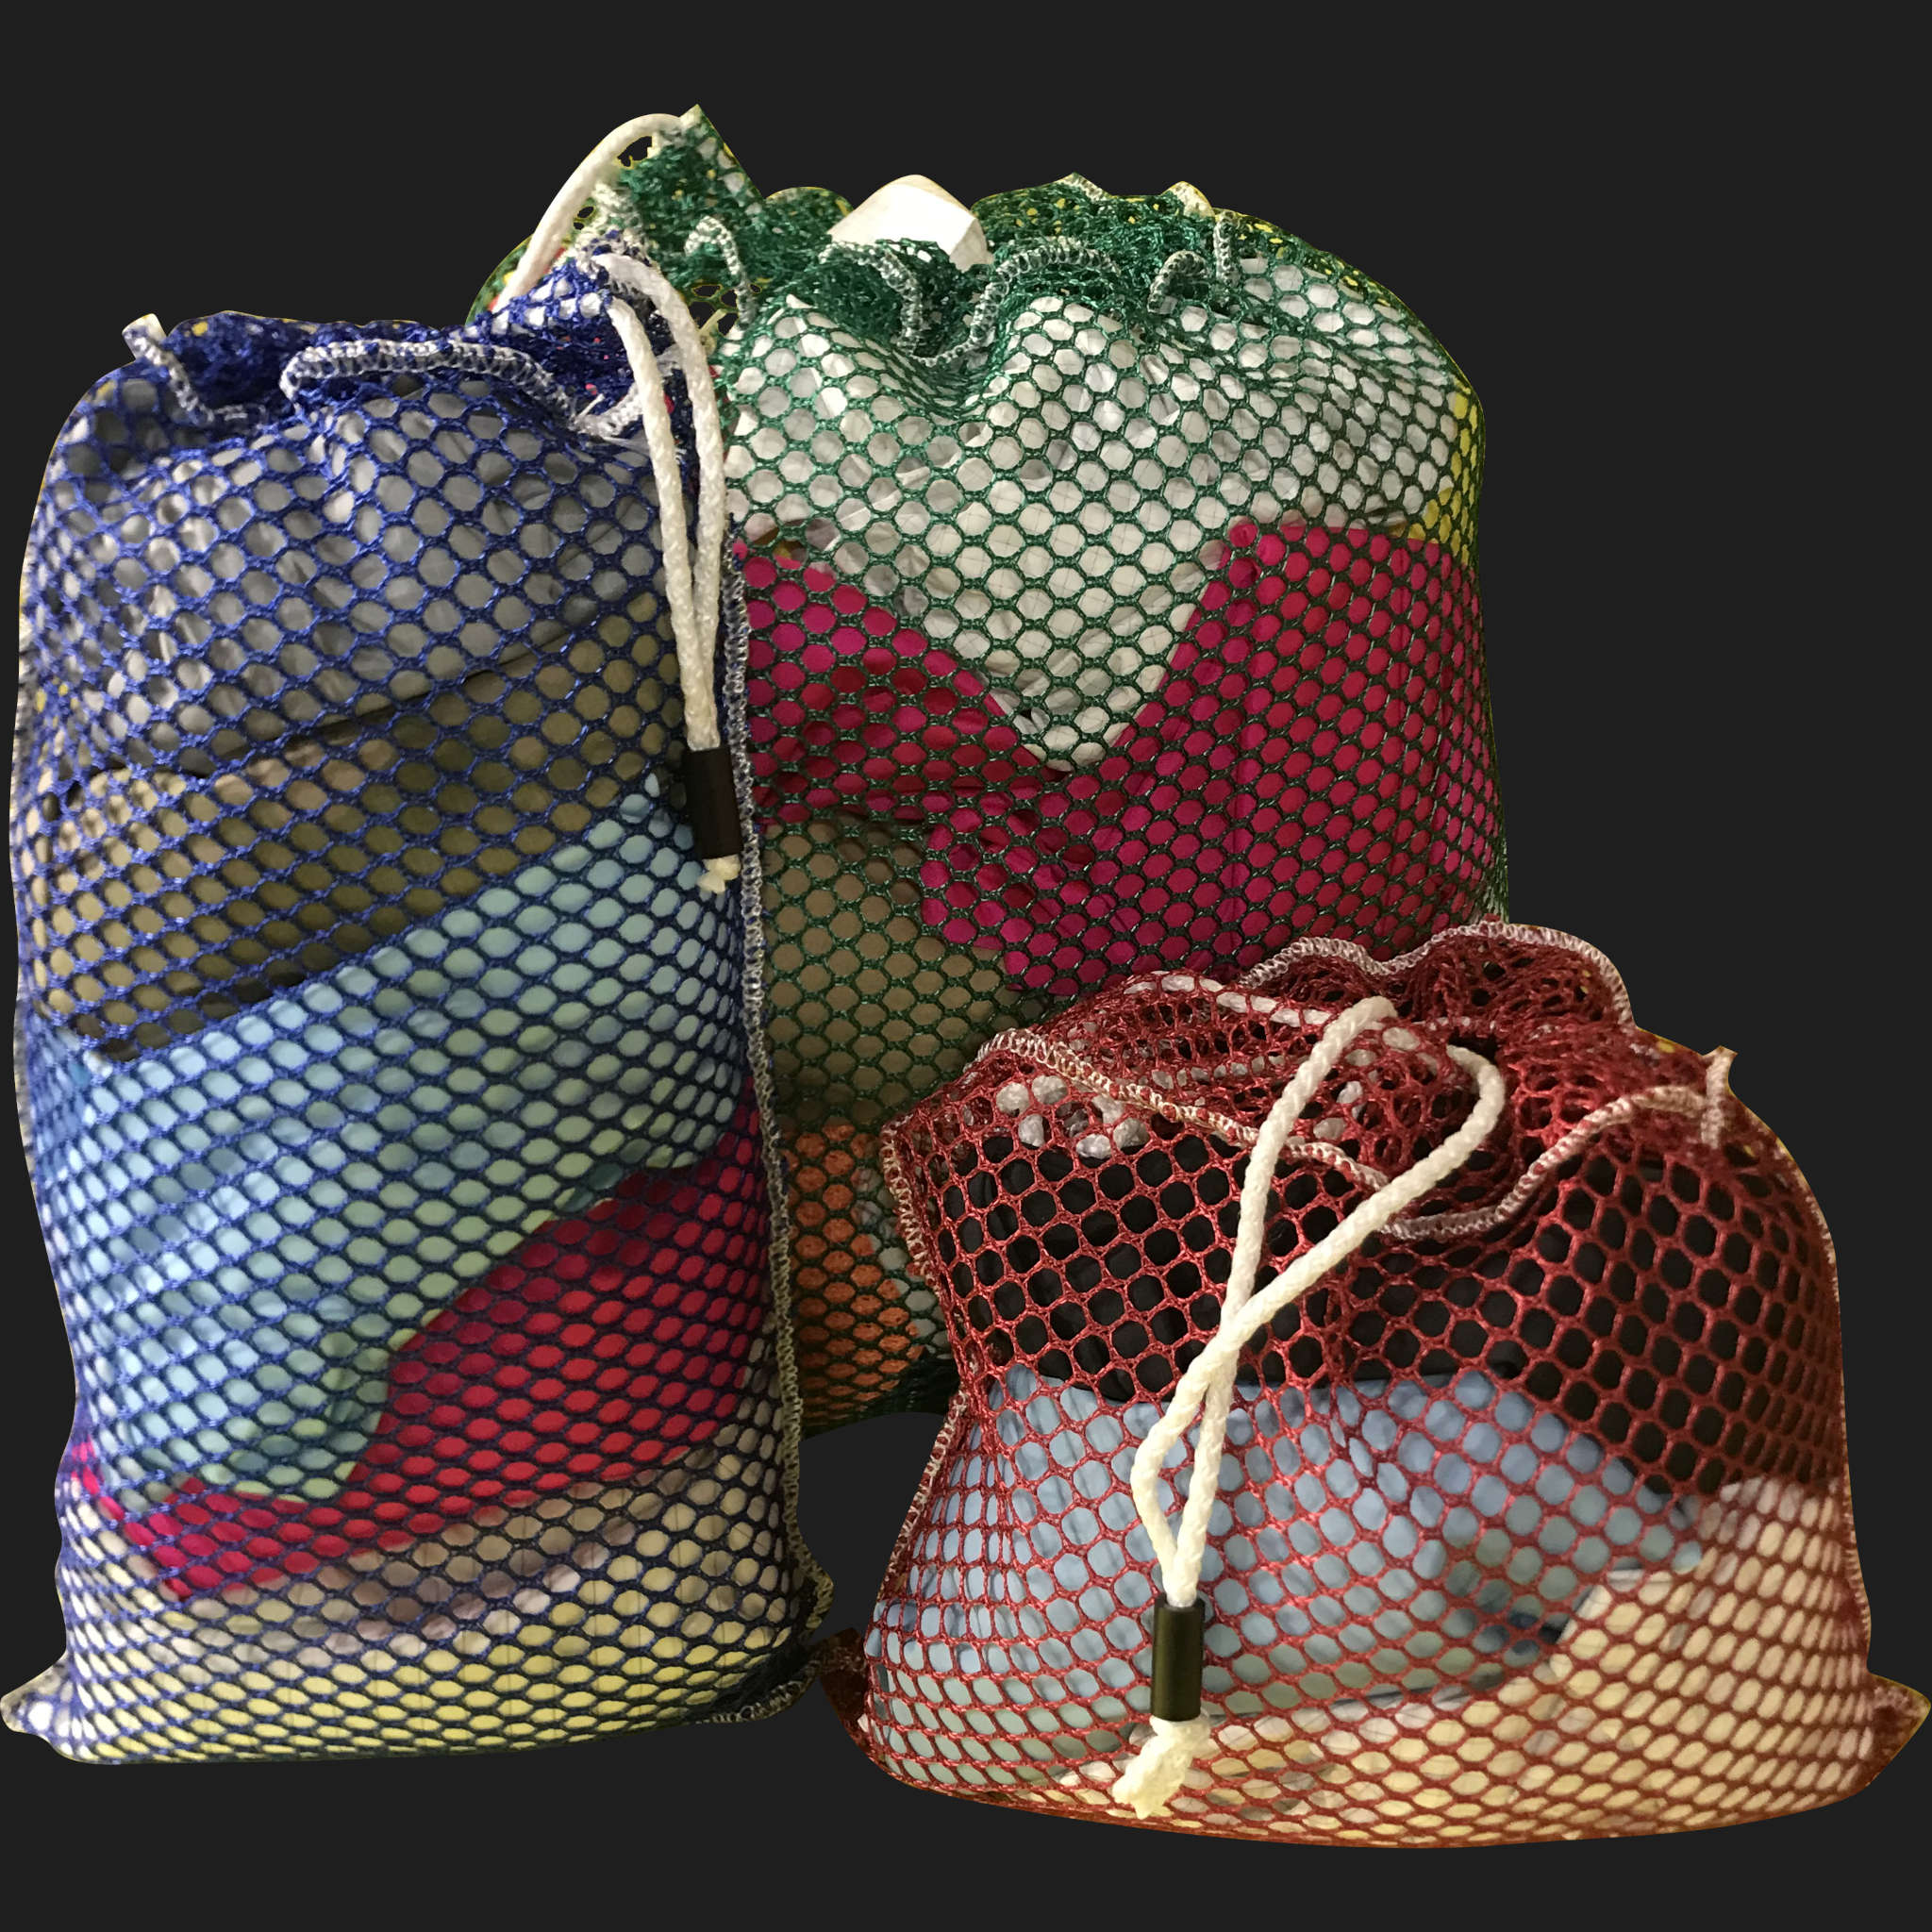 56" x 62" Customized Mesh-Net-Laundry Bags Heavy Duty with Cord and barrellock closure